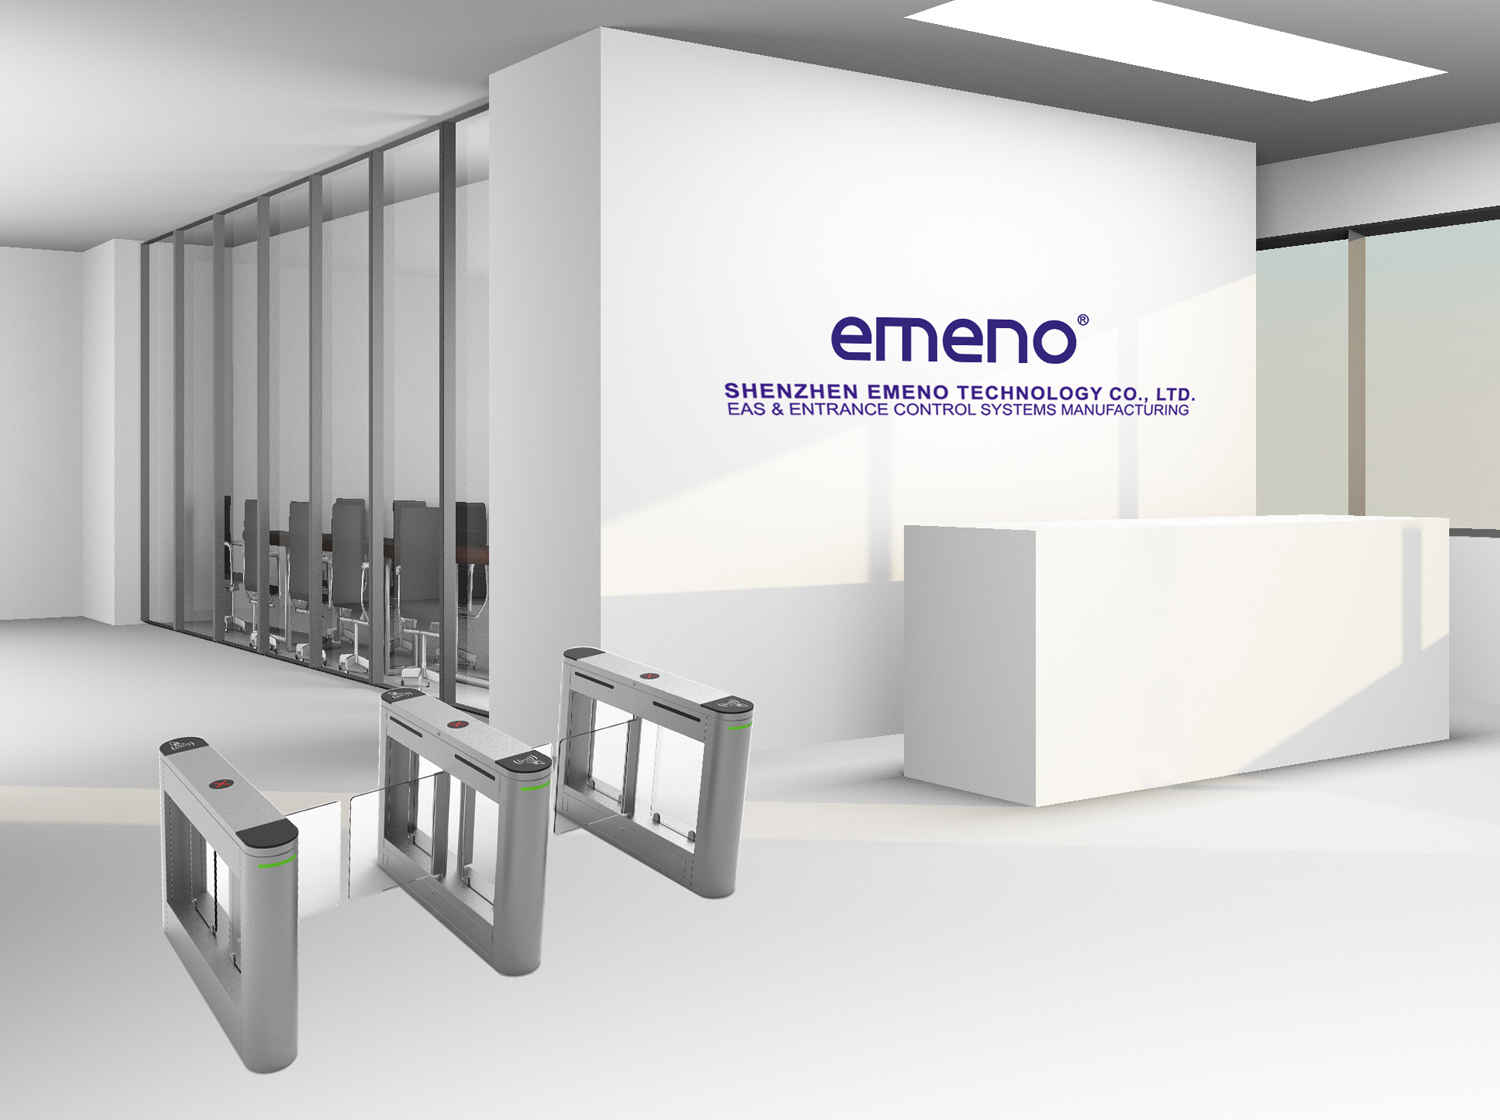 EMENO— A Full Portfolio of Trusted, Top-Quality Solutions Provider